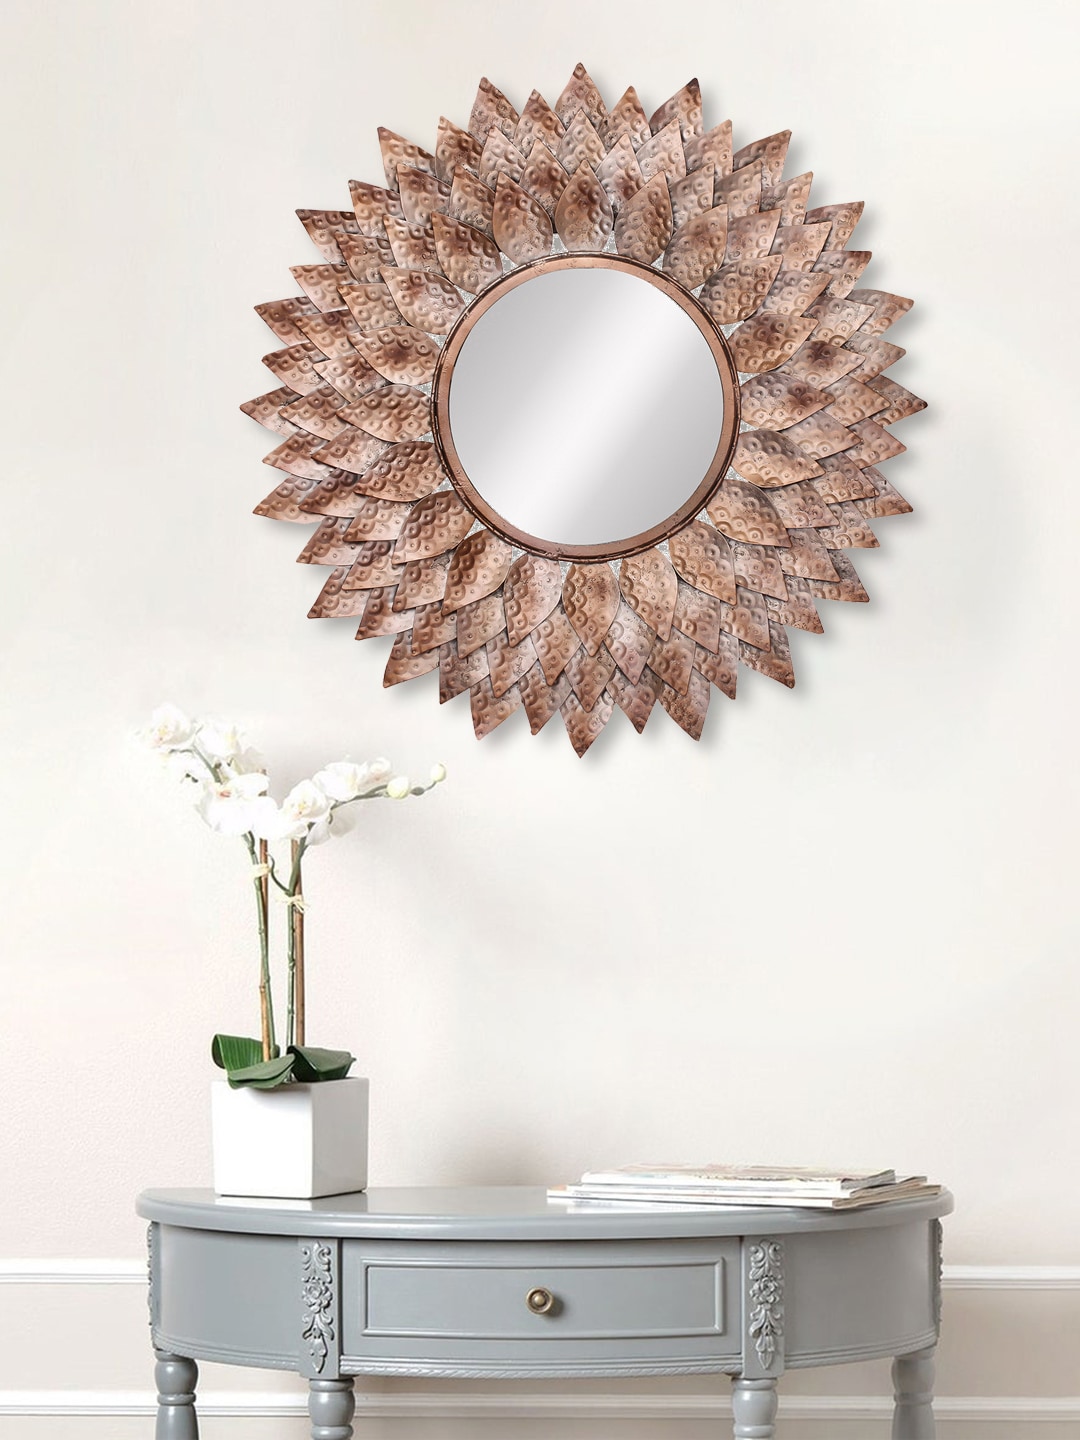 eCraftIndia Brown & Copper-Toned Metal Decorative Handcarved Wall Mirror Price in India